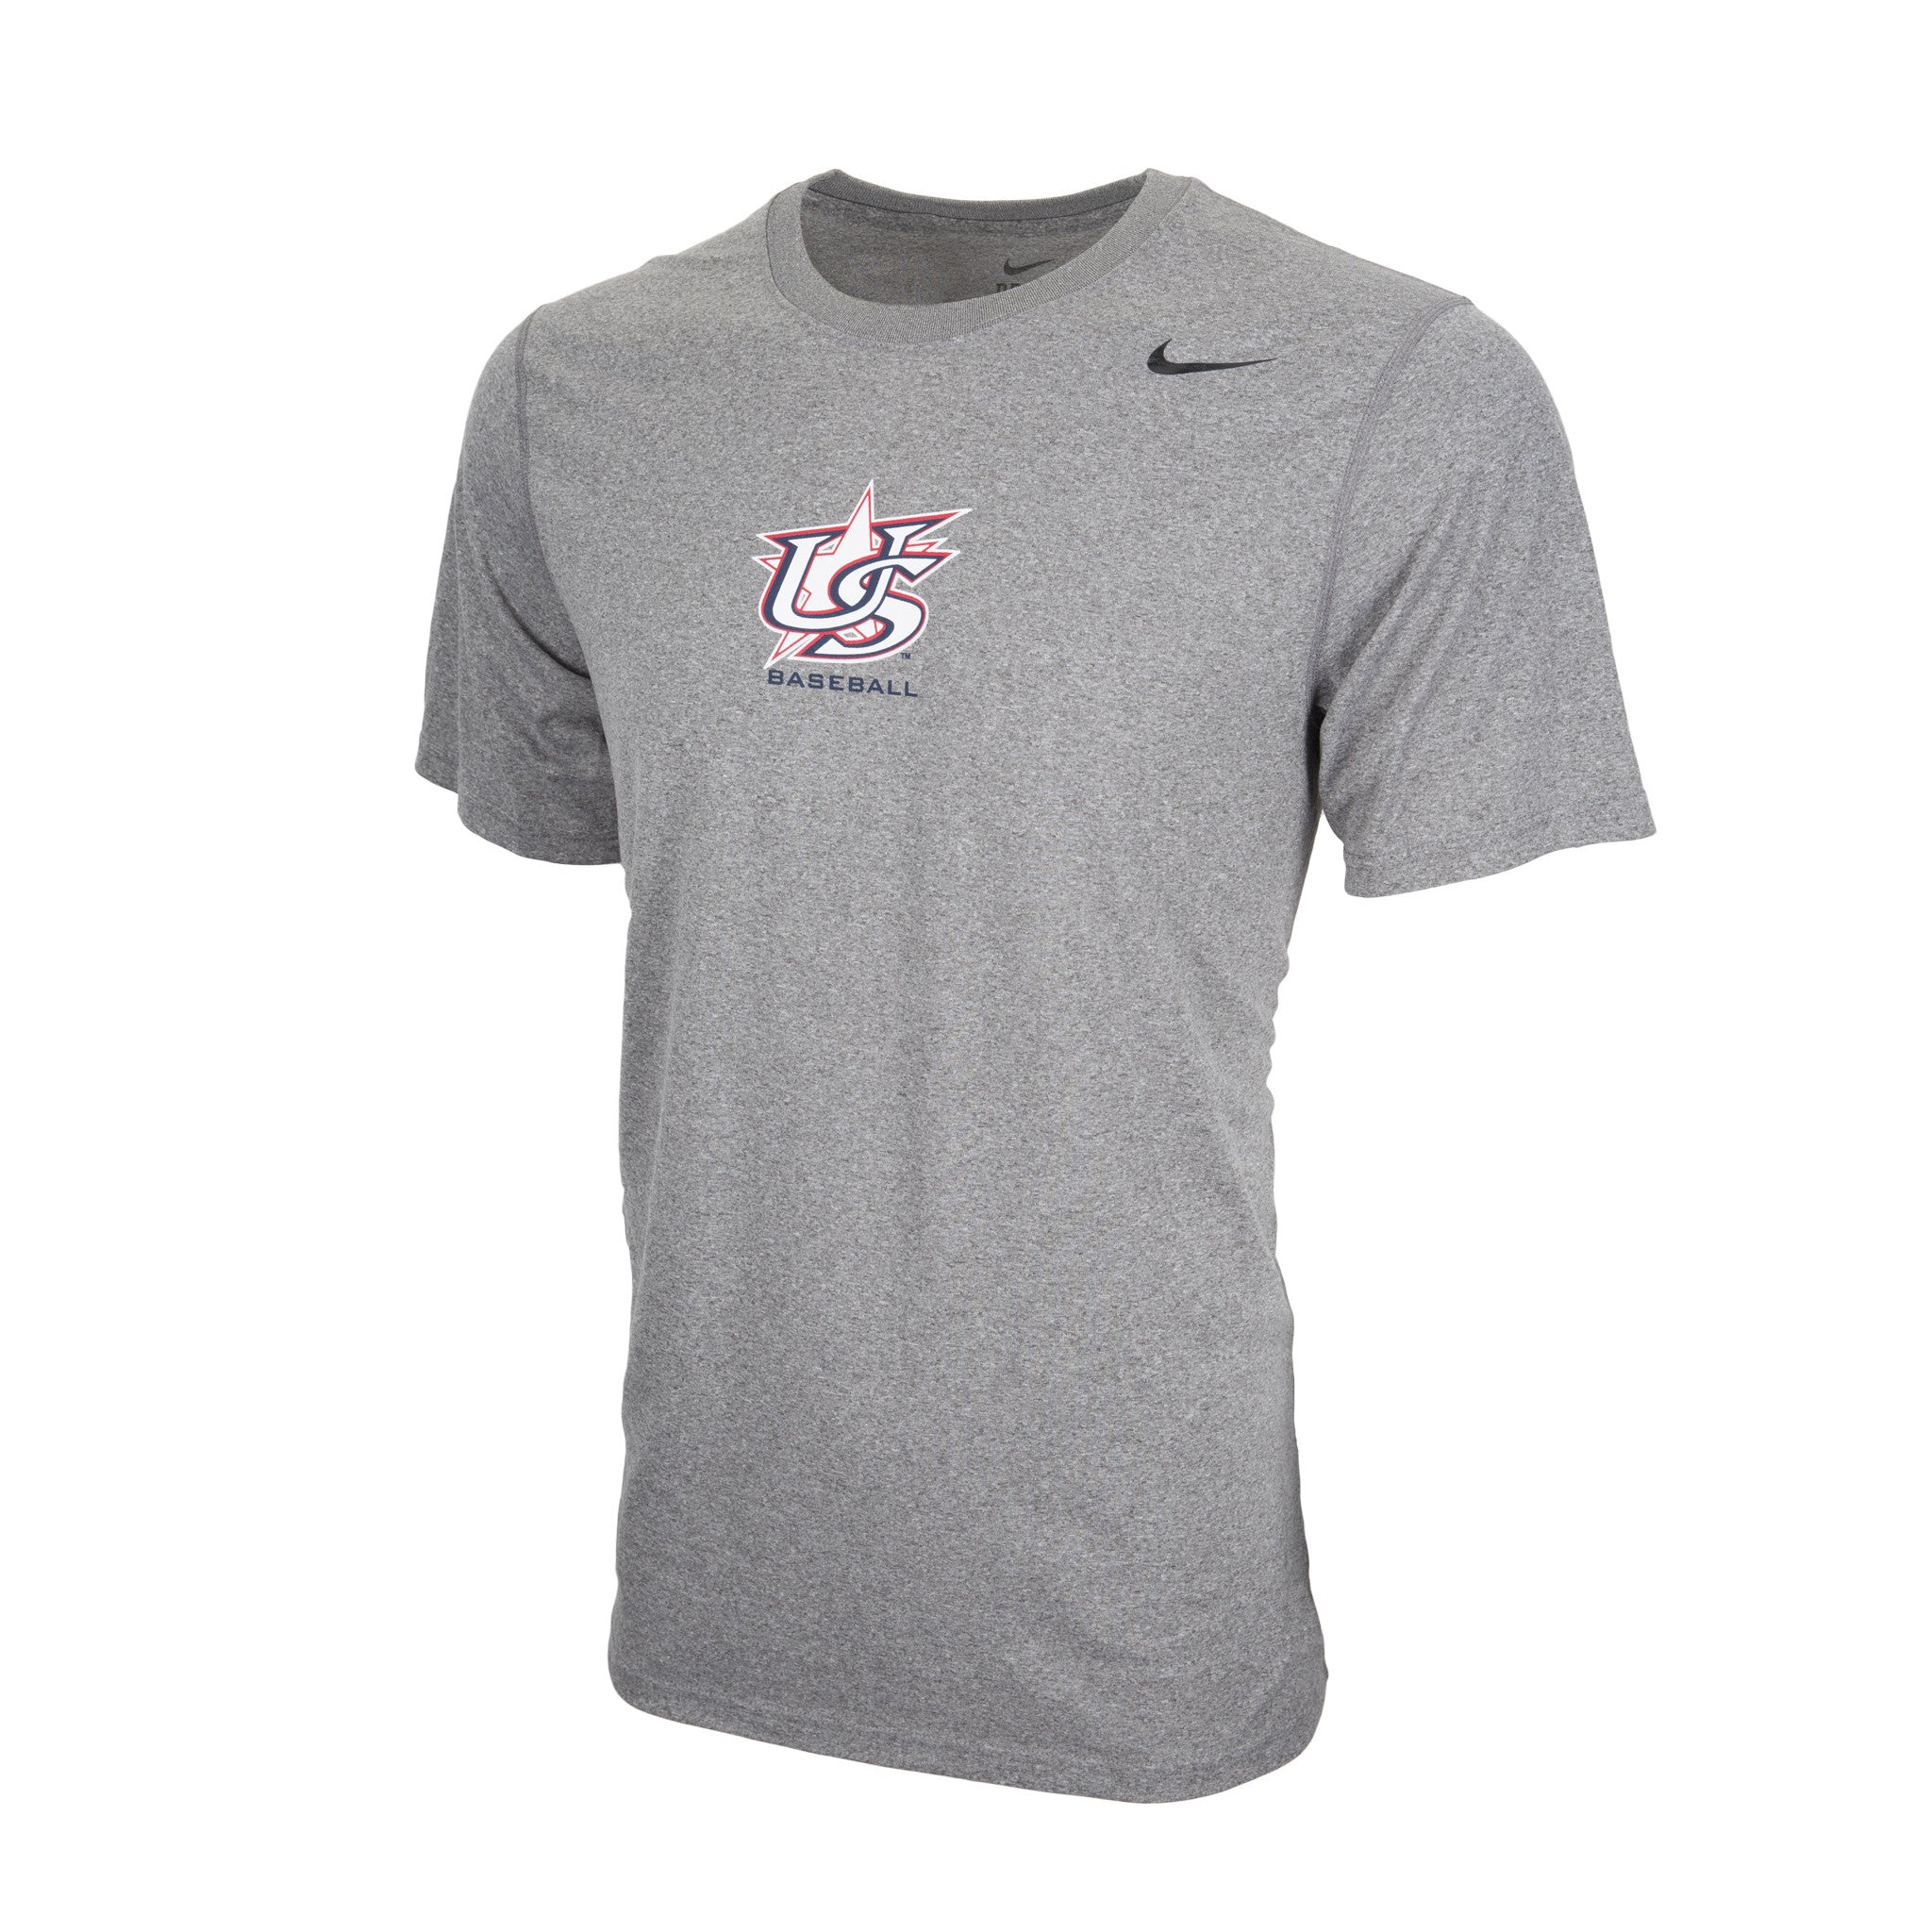 Nike MLB Authentic Collection Baseball Gray Dri Fit Logo Tee Size Large